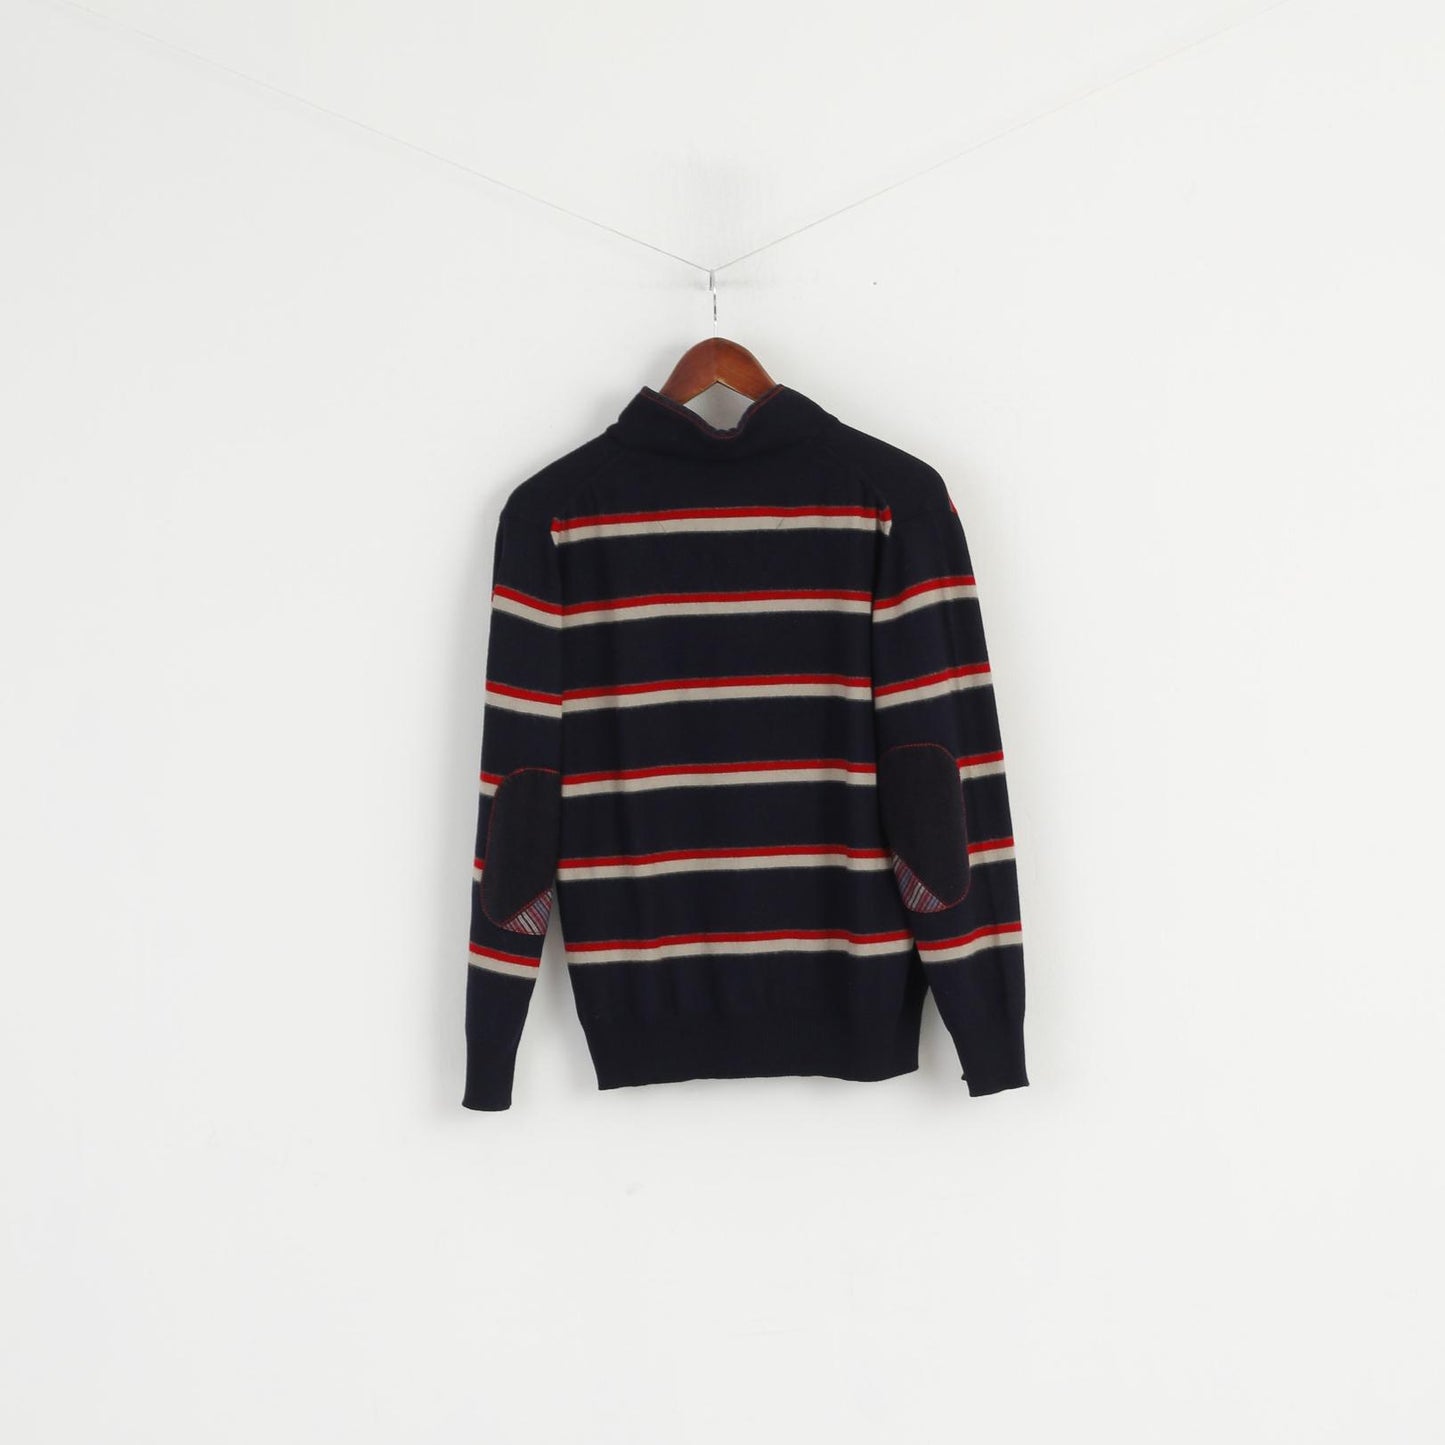 Claudio Campione Men L (S) Jumper Navy Yachting Wool White Marlin Striped Top